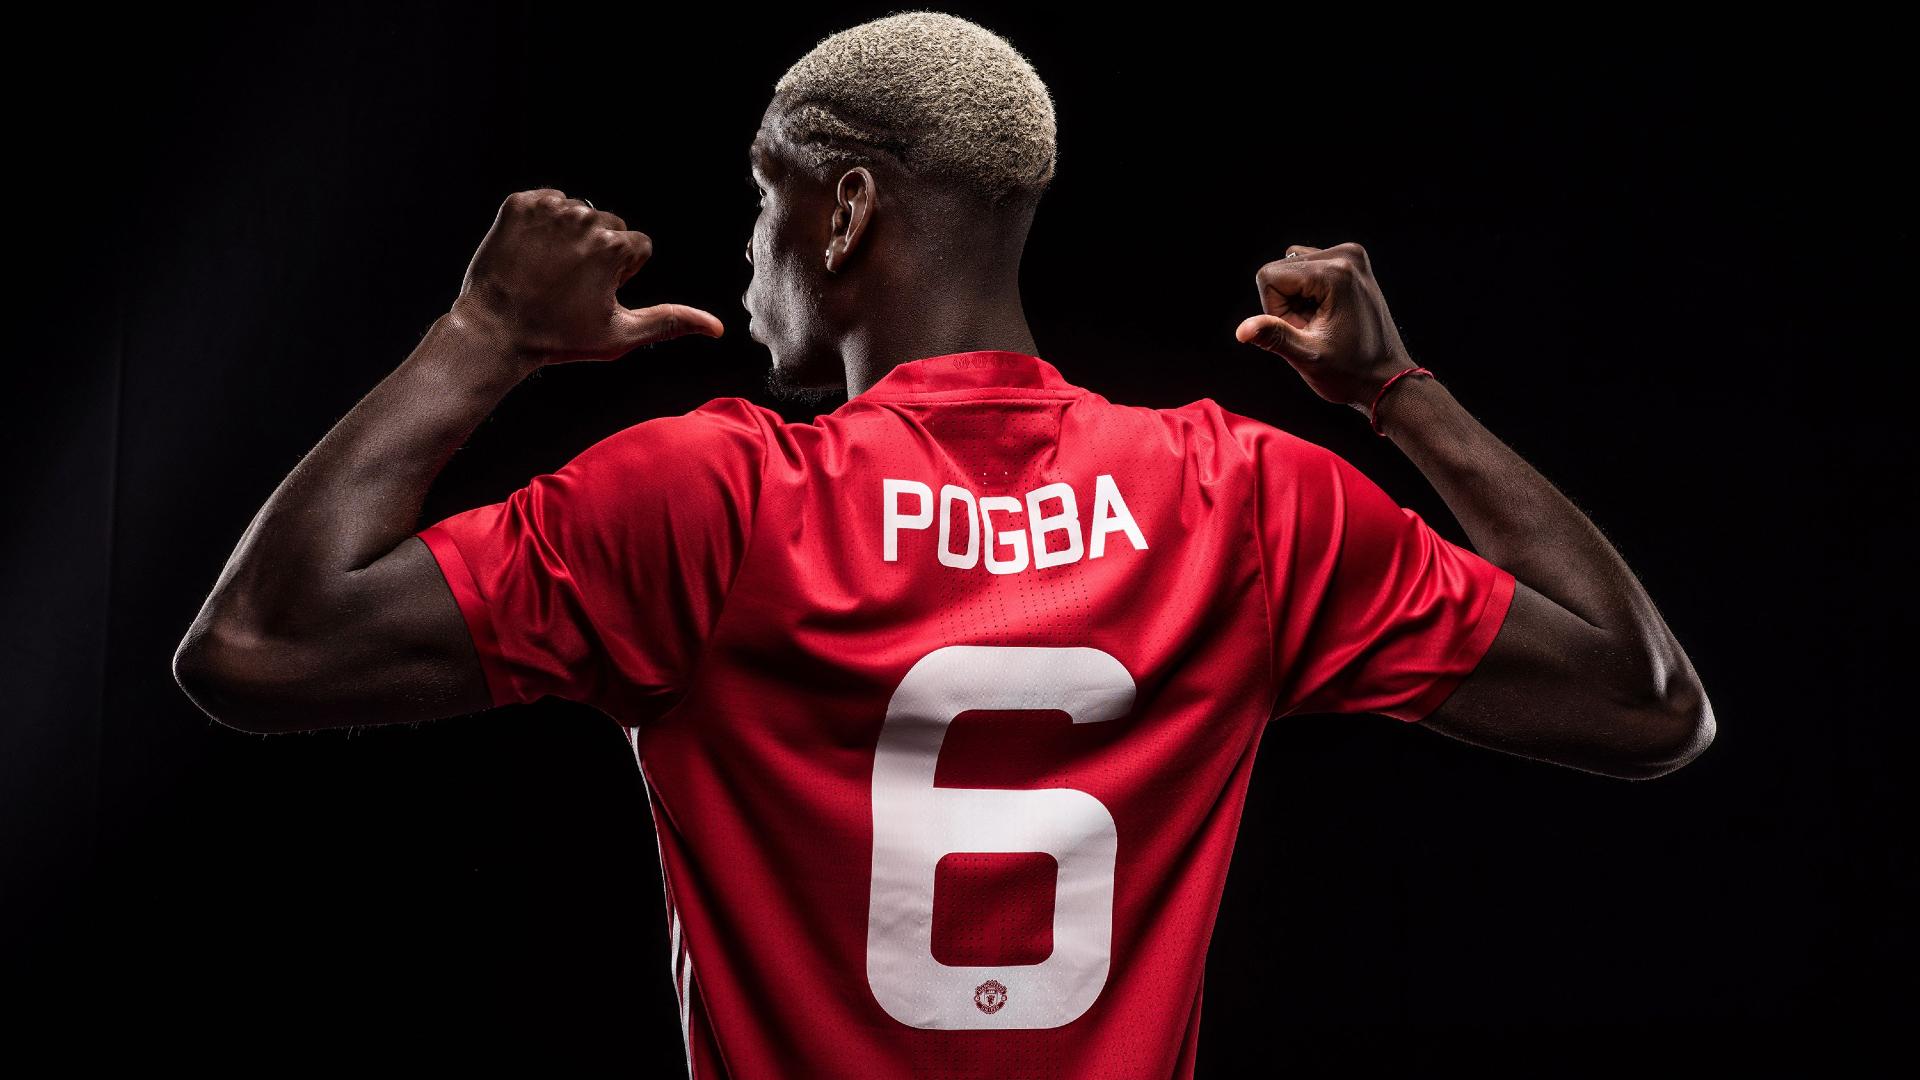 Paul Pogba for Manchester United, Credit: Twitter/@ManUtd